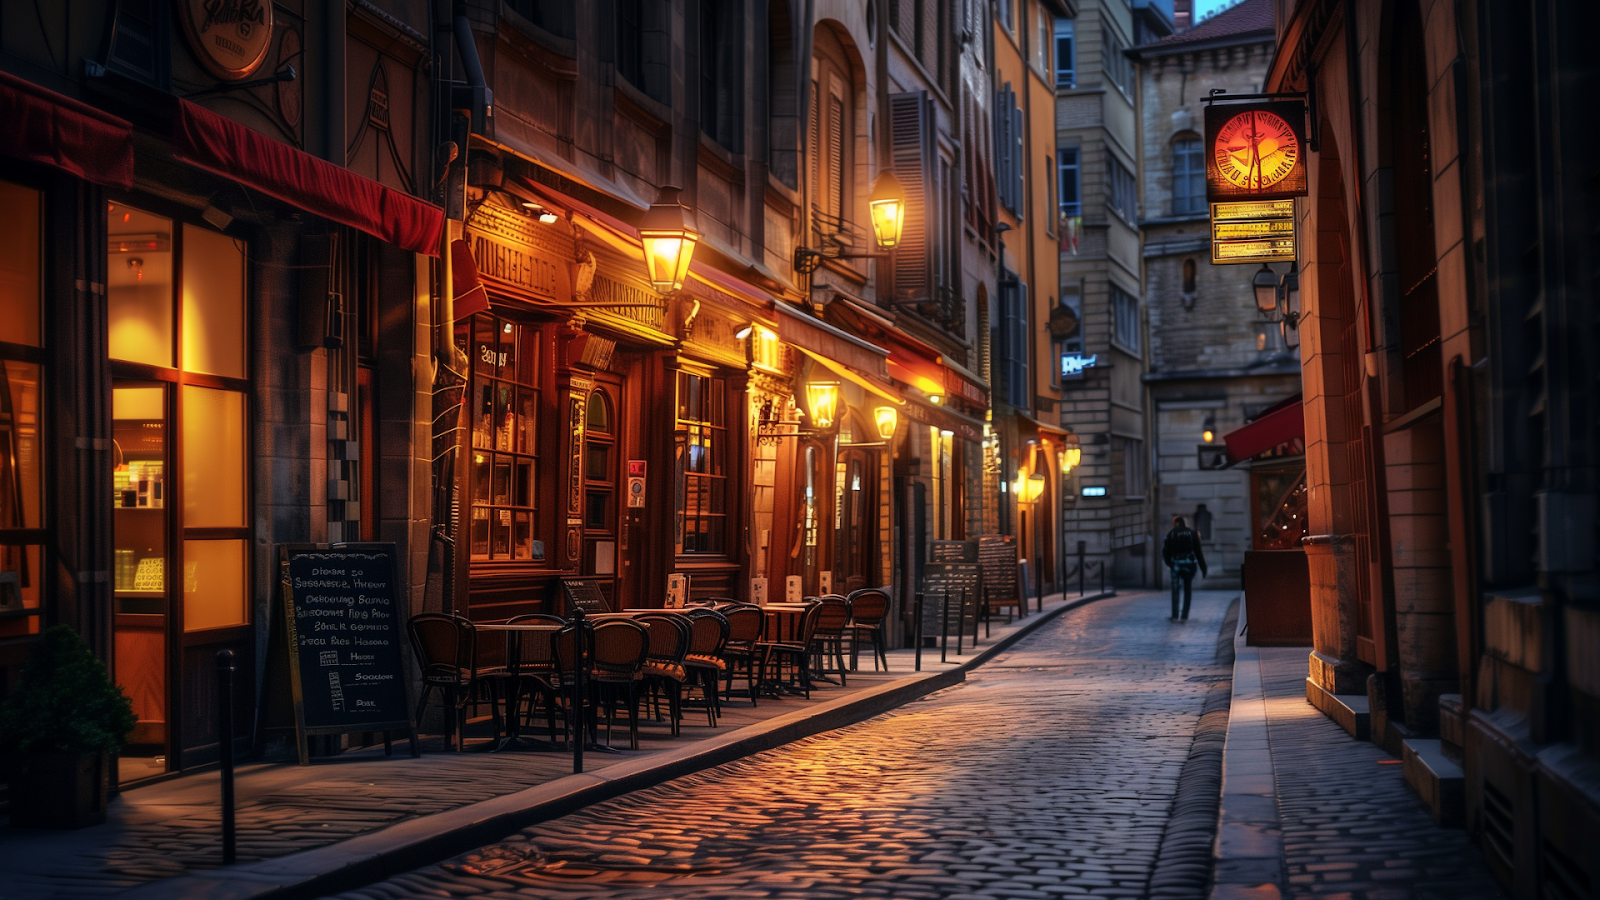 Vieux Lyon at dusk, where the historic charm is enhanced by street lamps and lively café culture. 